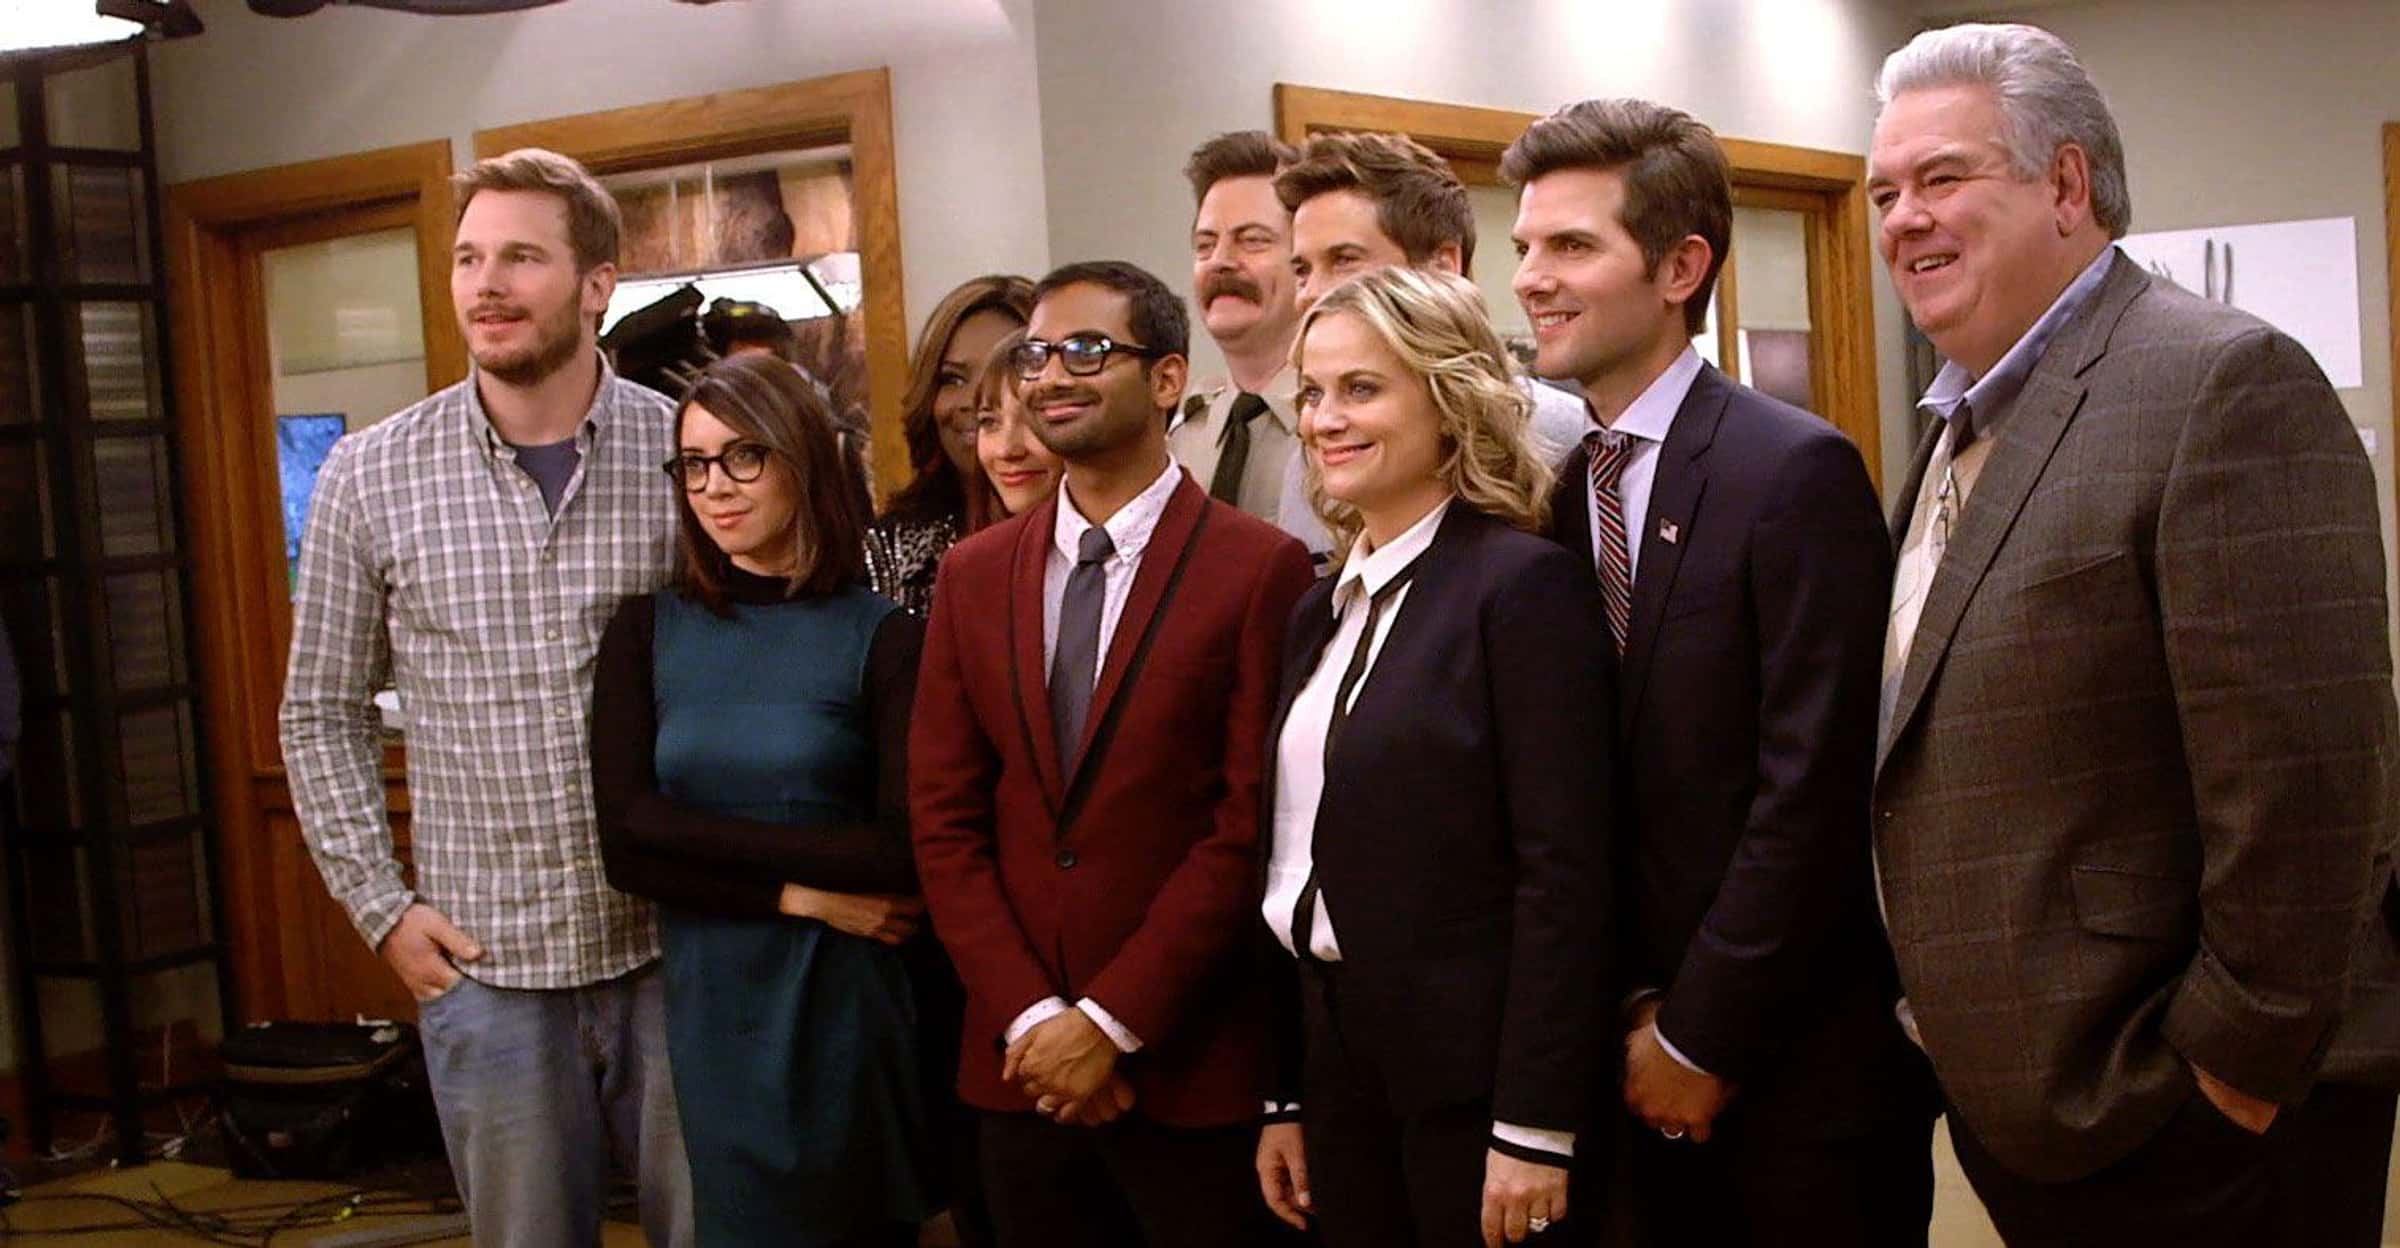 22+ Great TV Comedy Shows About the Workplace and Co-Workers